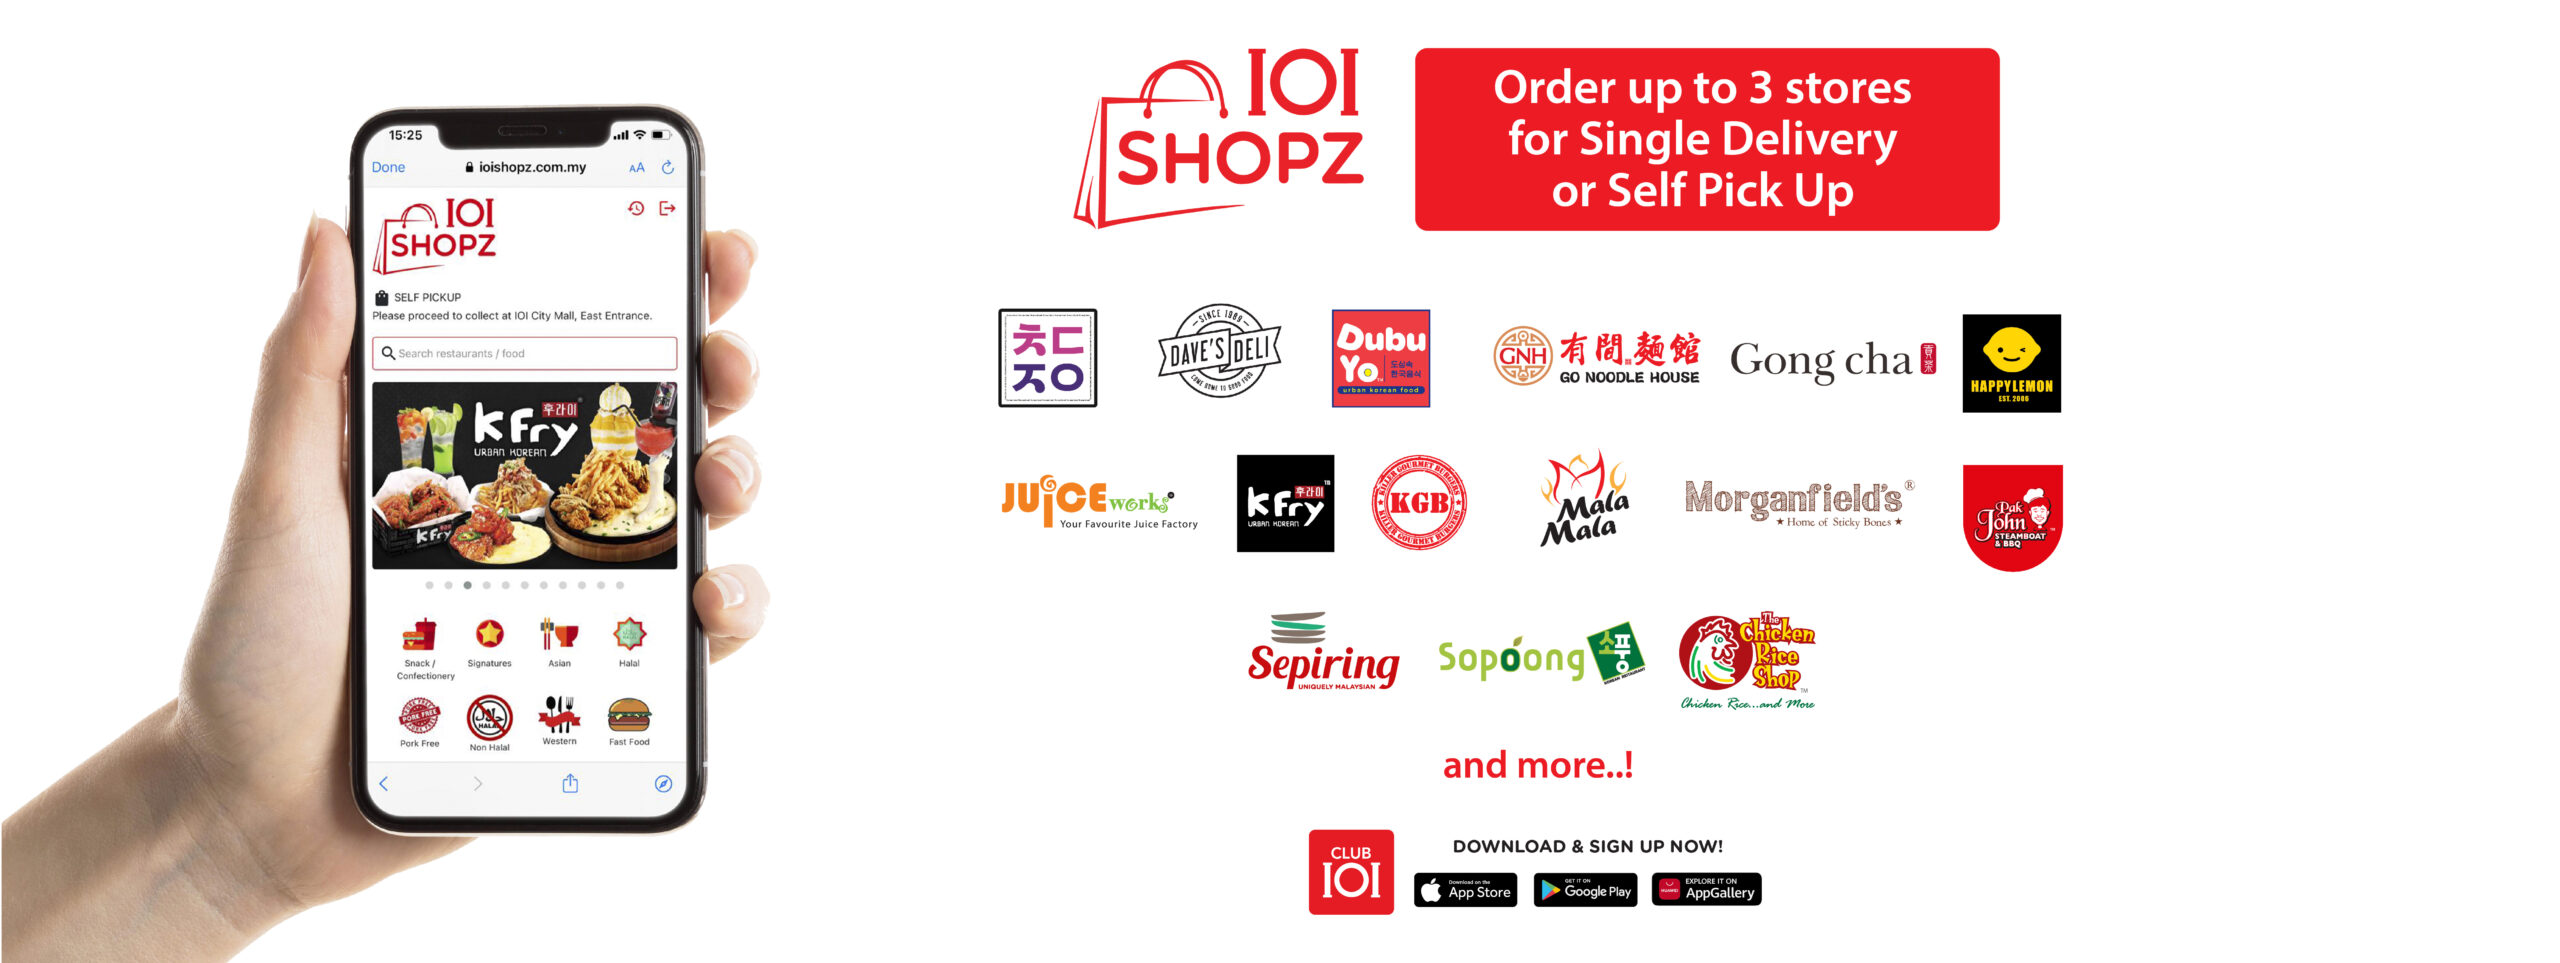 IOI SHOPZ - 3 stores for Single Delivery